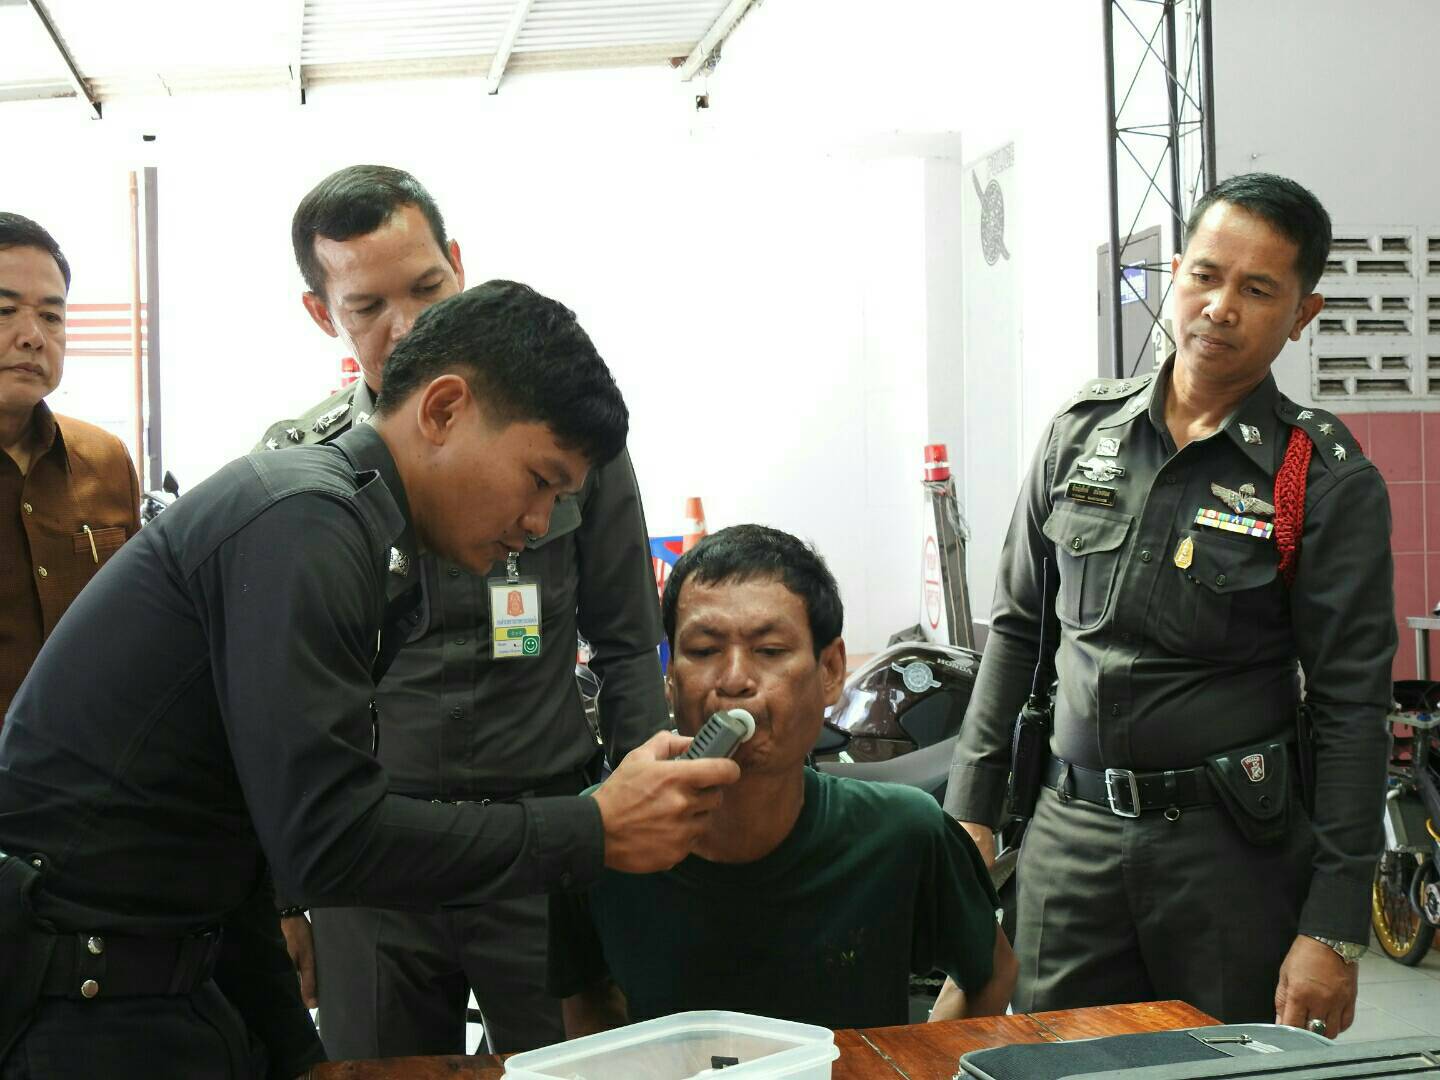 Sombat Boonsalee is given a breathalyzer test after being arrested for drunkenness at a Surin province polling station.